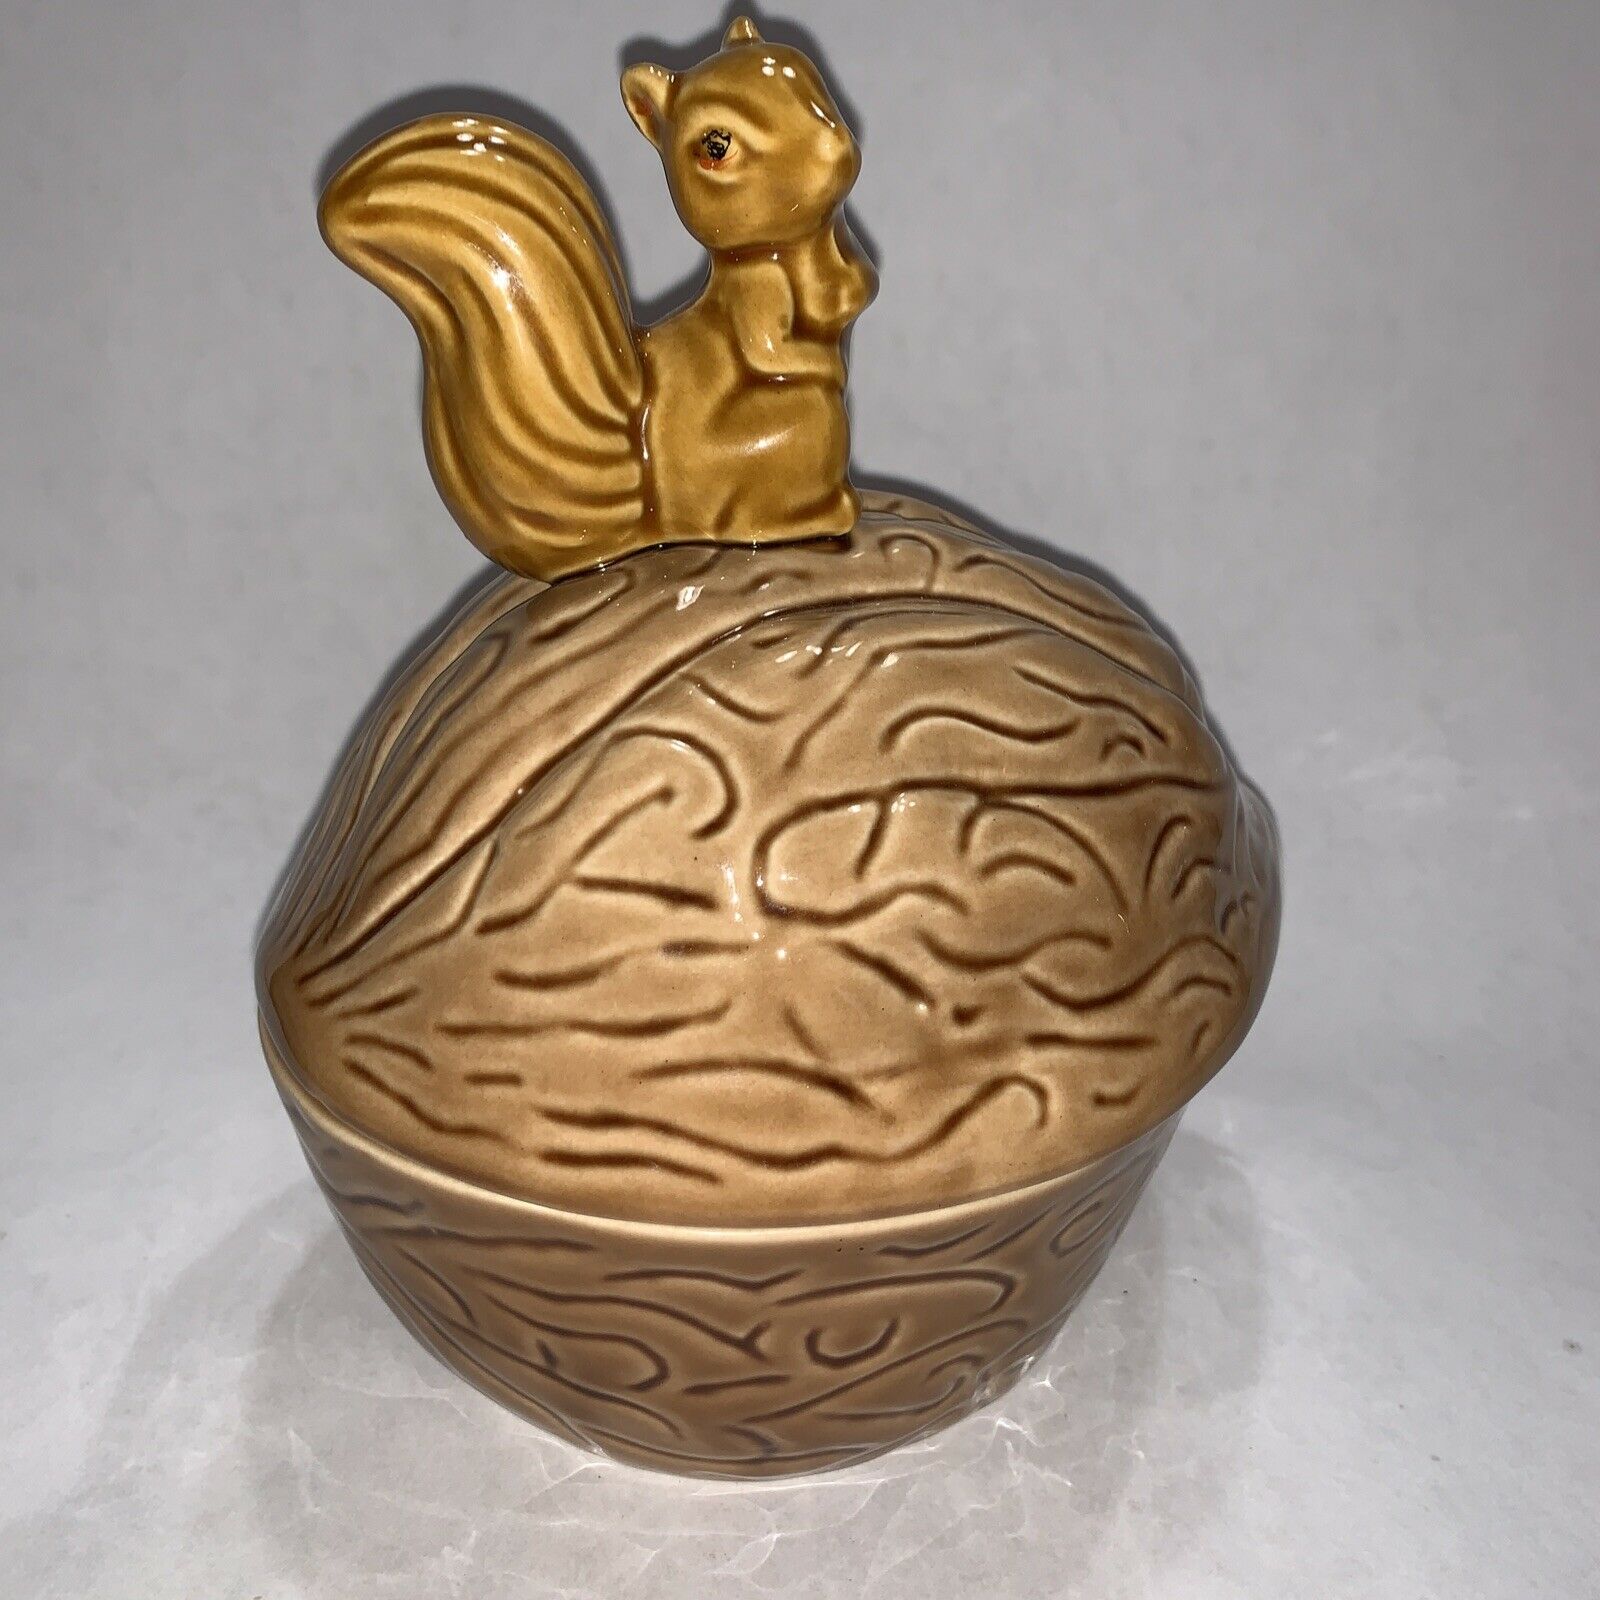 Vintage Ceramic Walnut Cookie Jar With Squirrel On Lid Candy Dish Nut Bowl